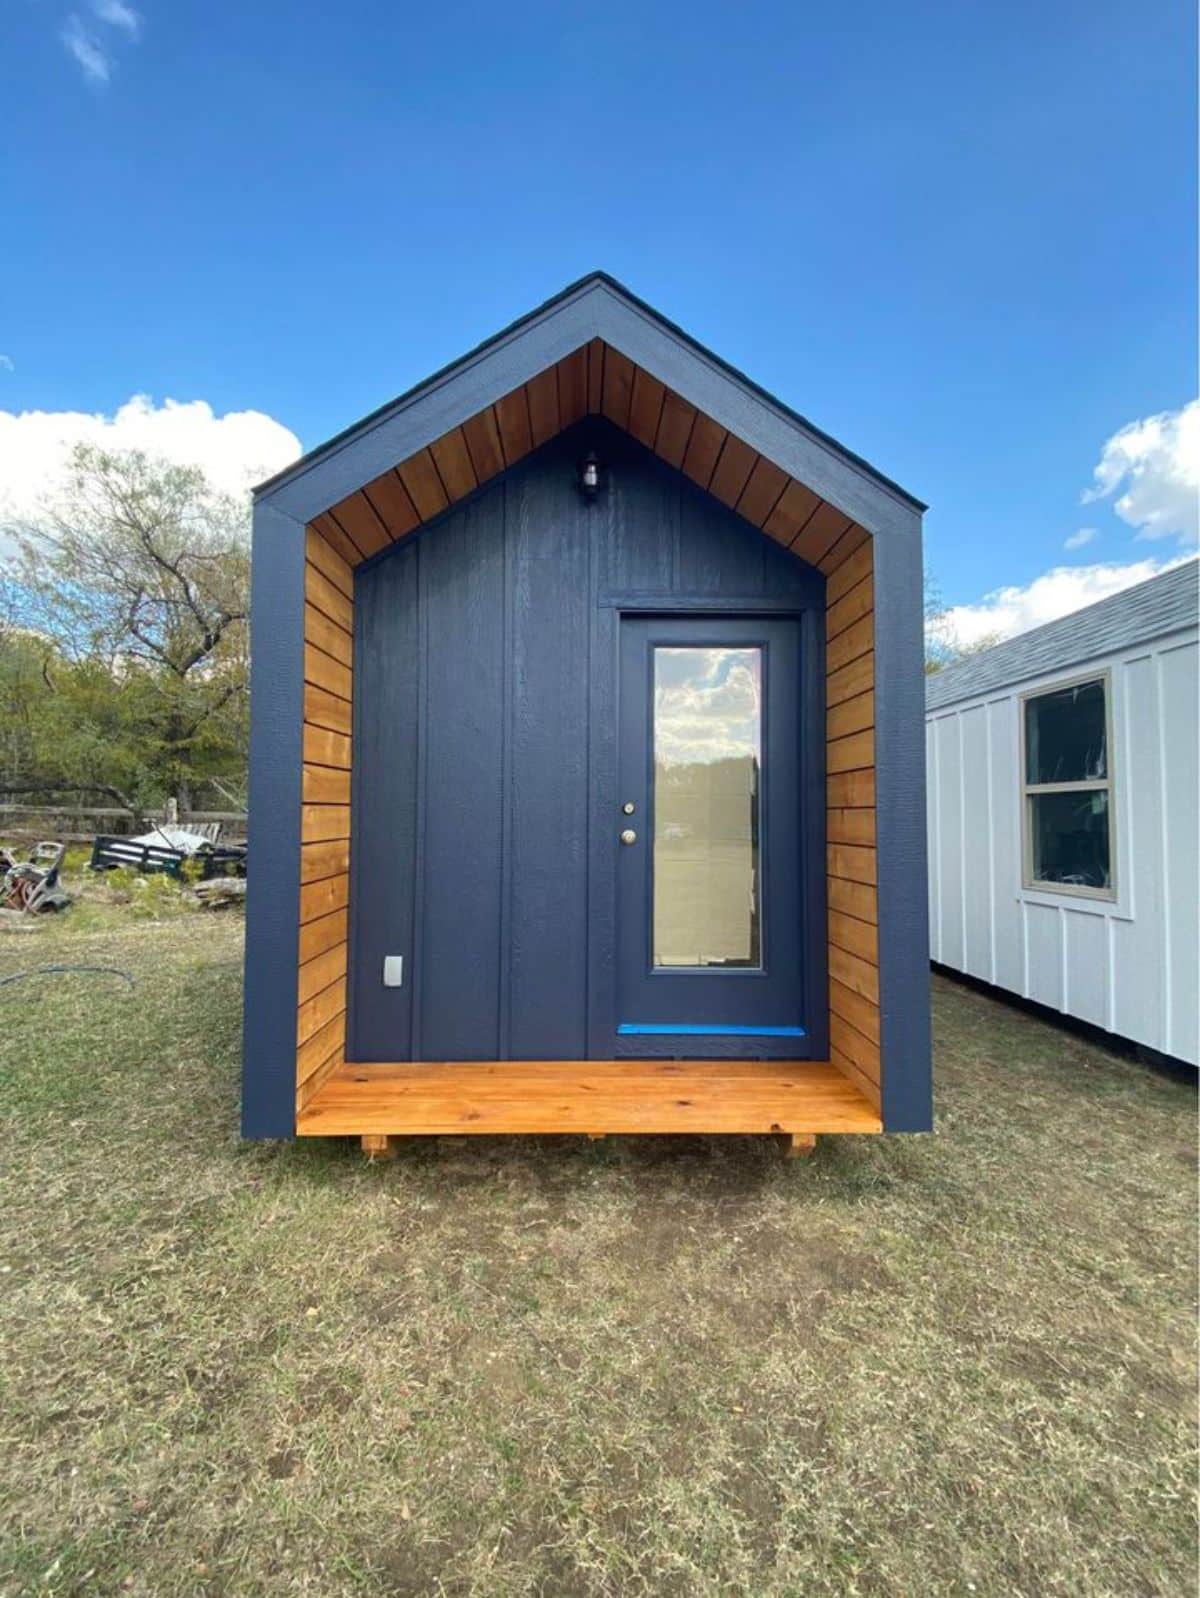 Main entrance view of Tiny Home on Skids